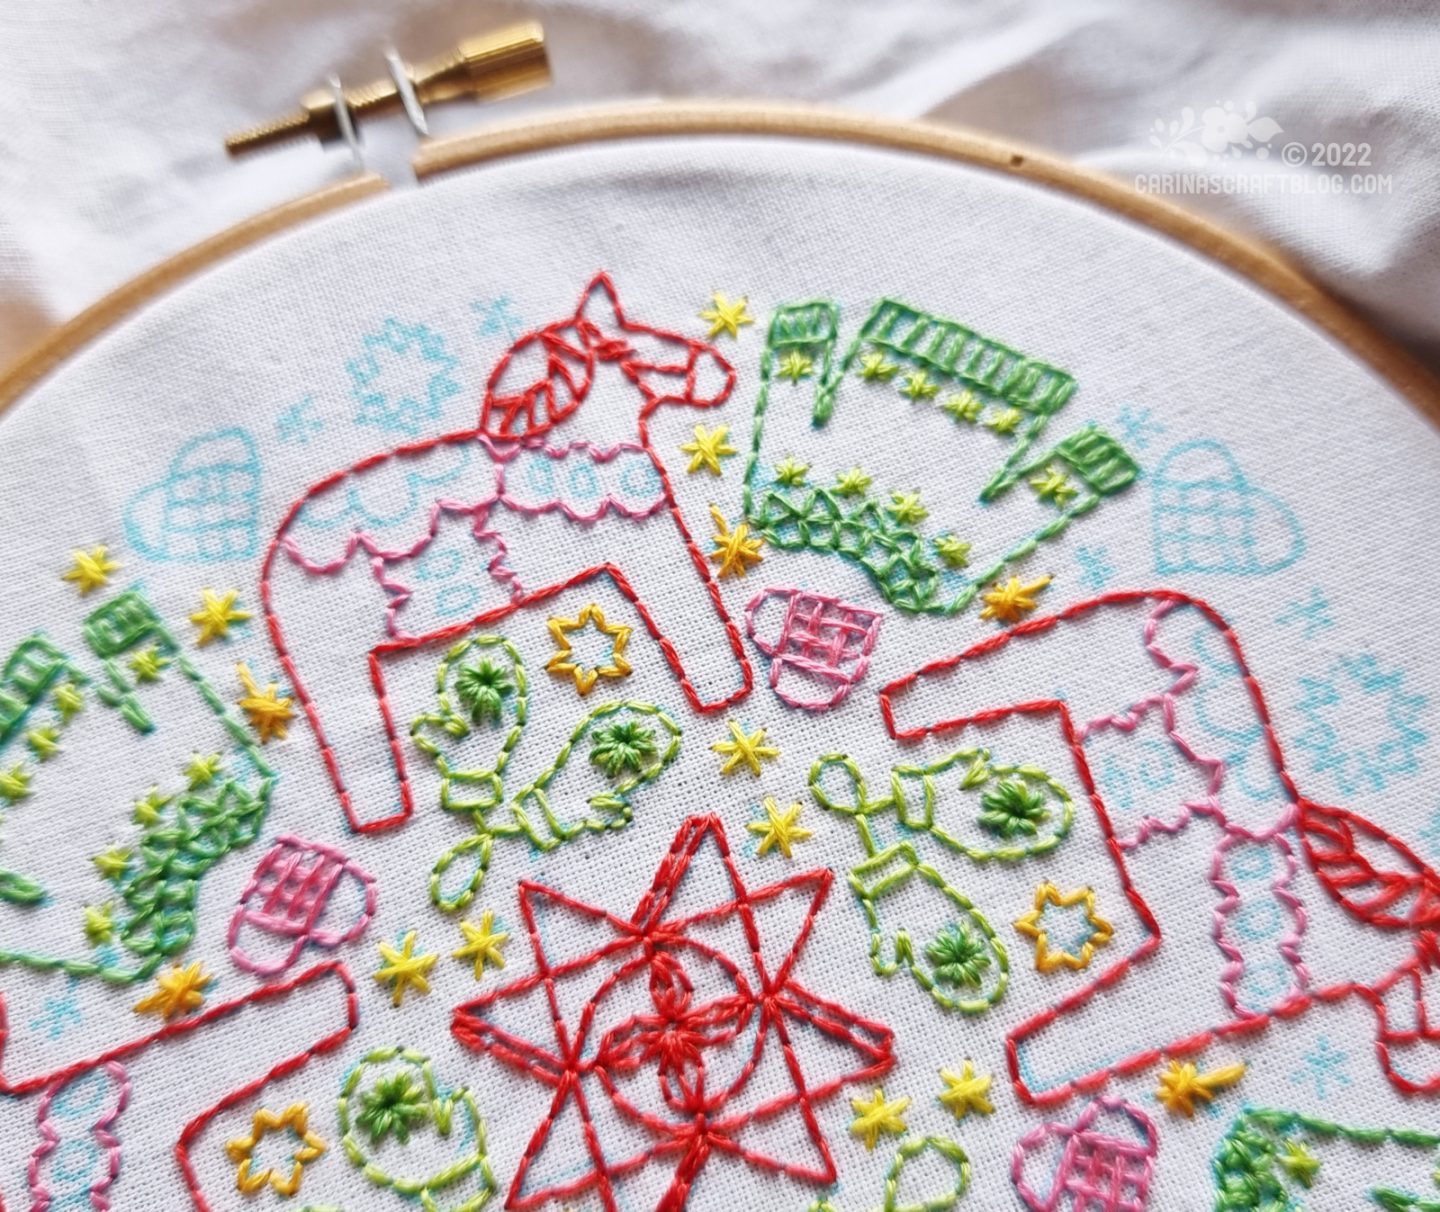 Close partial view of white fabric in a wooden embroidery hoop. On the fabric is embroidered a design with red dala horse, green sweaters, green mittens and a red woven star.